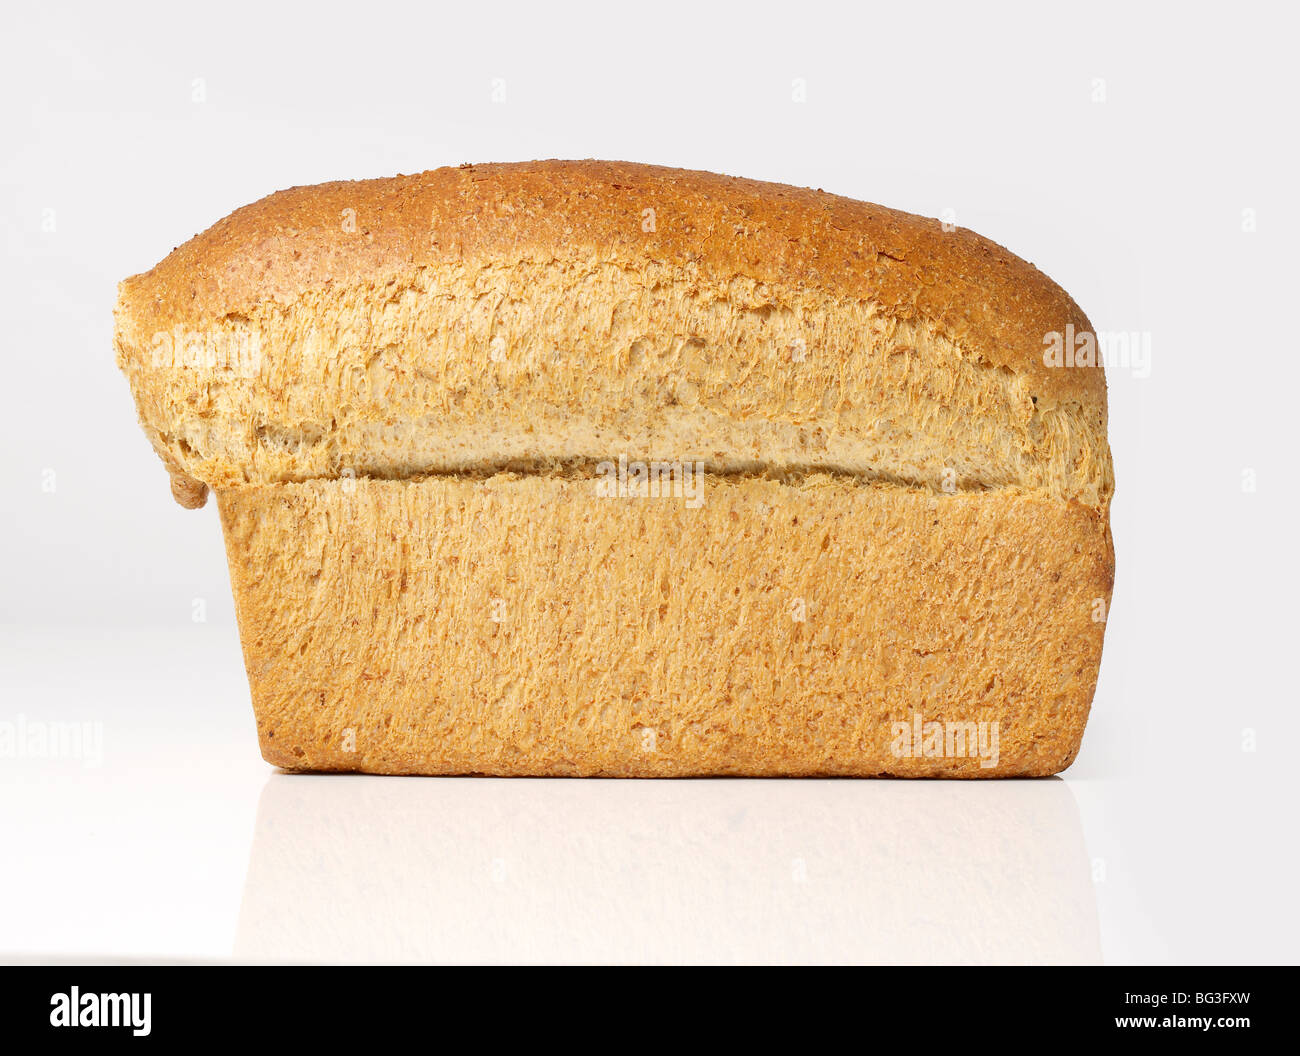 Whole Wheat Pullman Loaf Stock Photo